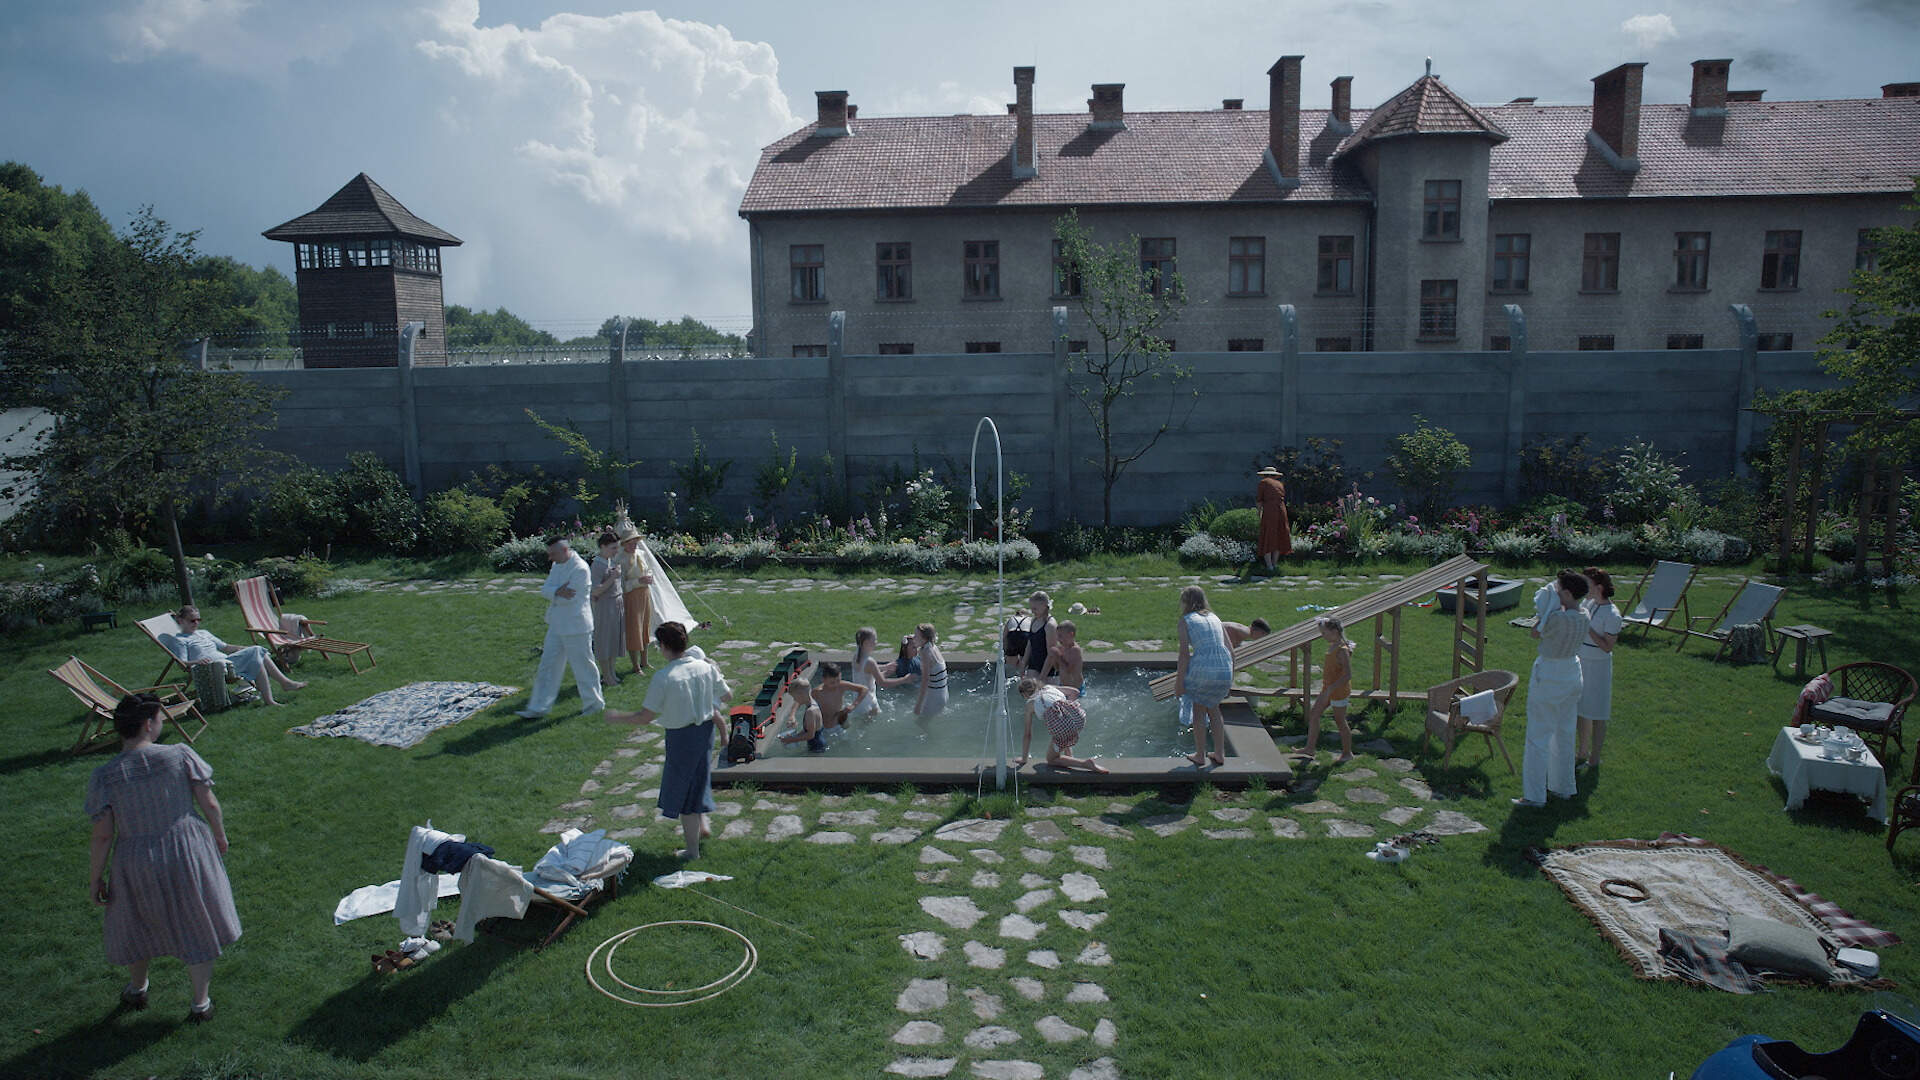 A still from the film 'The Zone of Interest'. People are shown outside lounging in chairs and swimming, among other outdoor activities. A fence